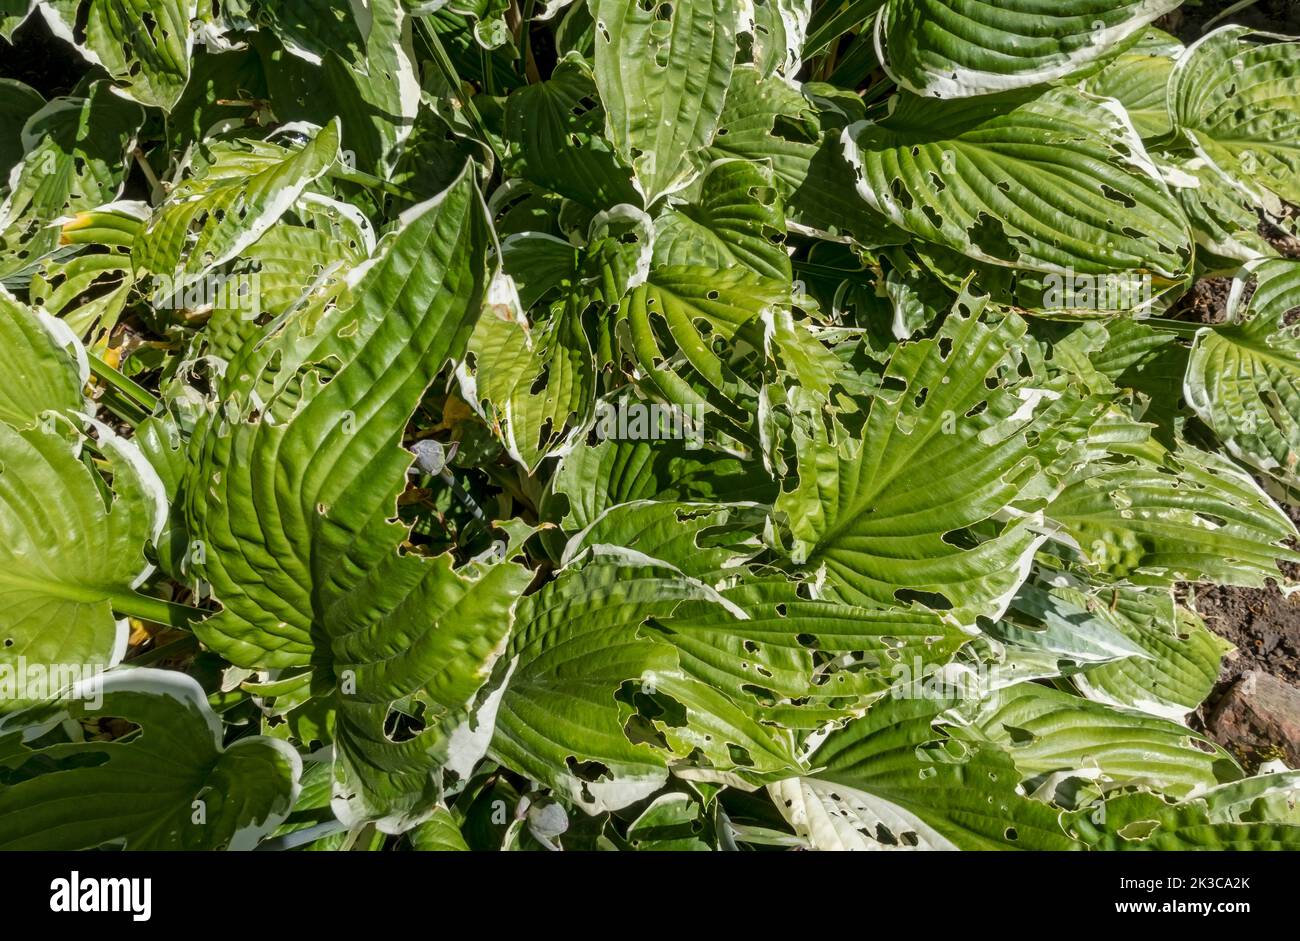 Close up of hosta hostas growing in border with leaves eaten damaged by slugs and snails in summer England UK United Kingdom GB Great Britain Stock Photo